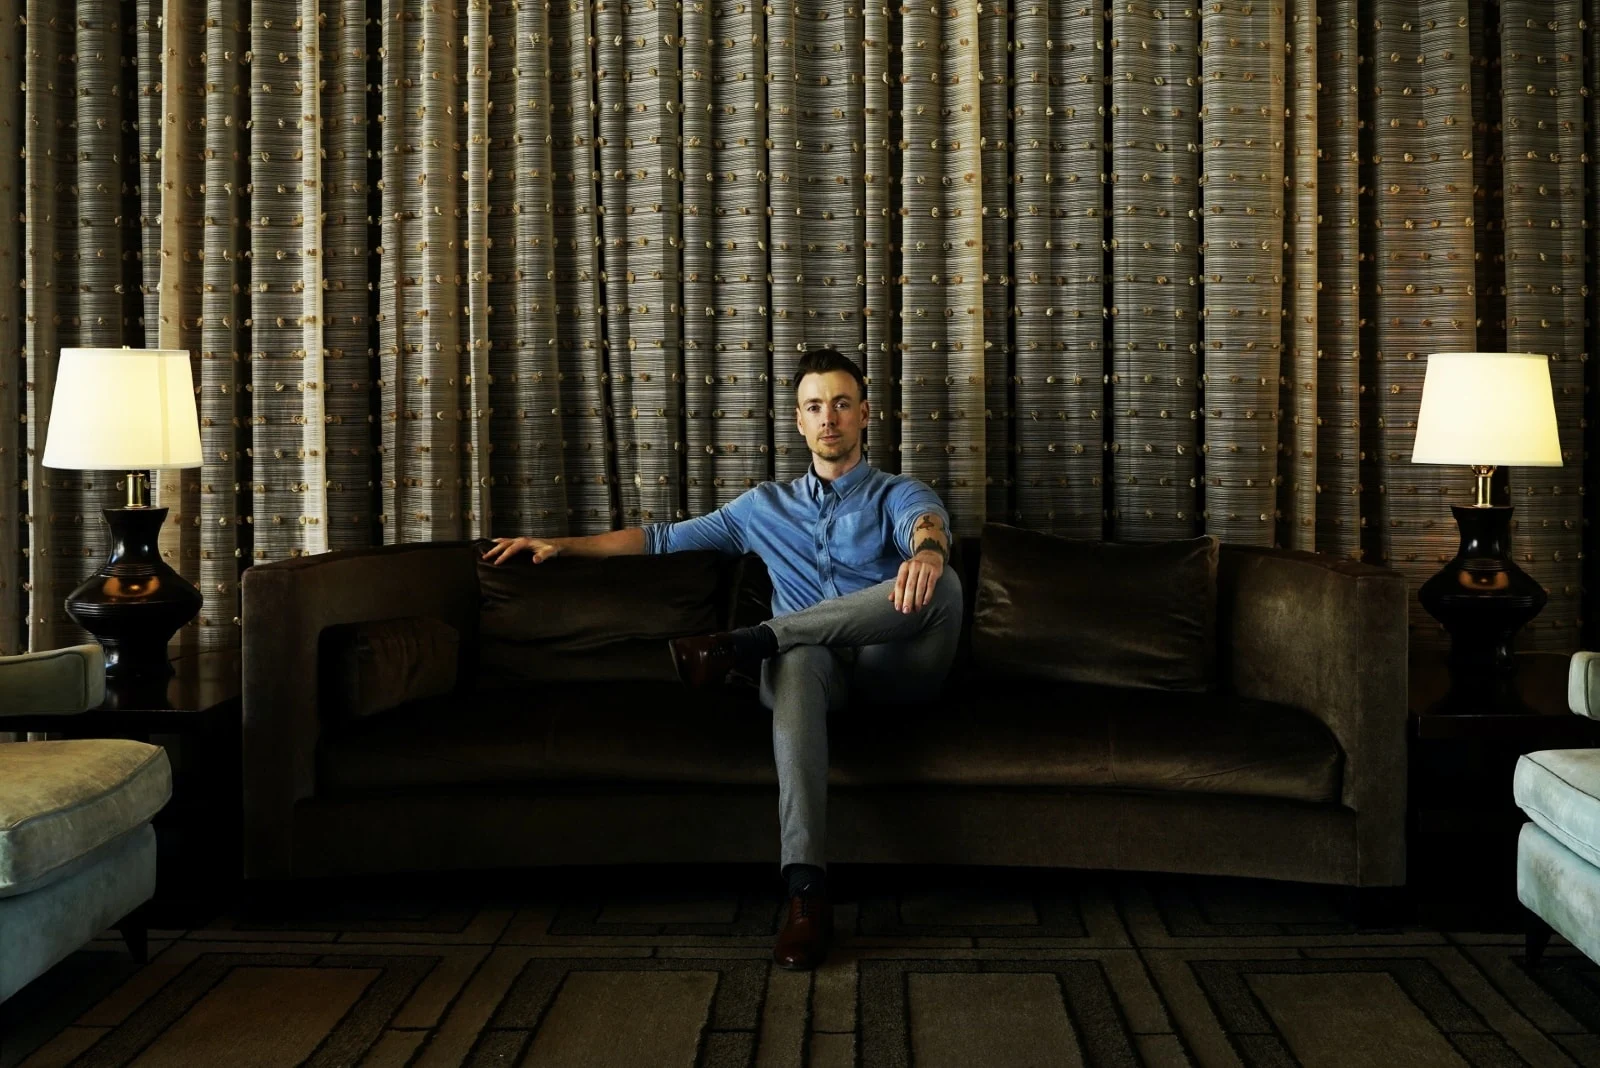 pensive man in denim shirt sitting on couch